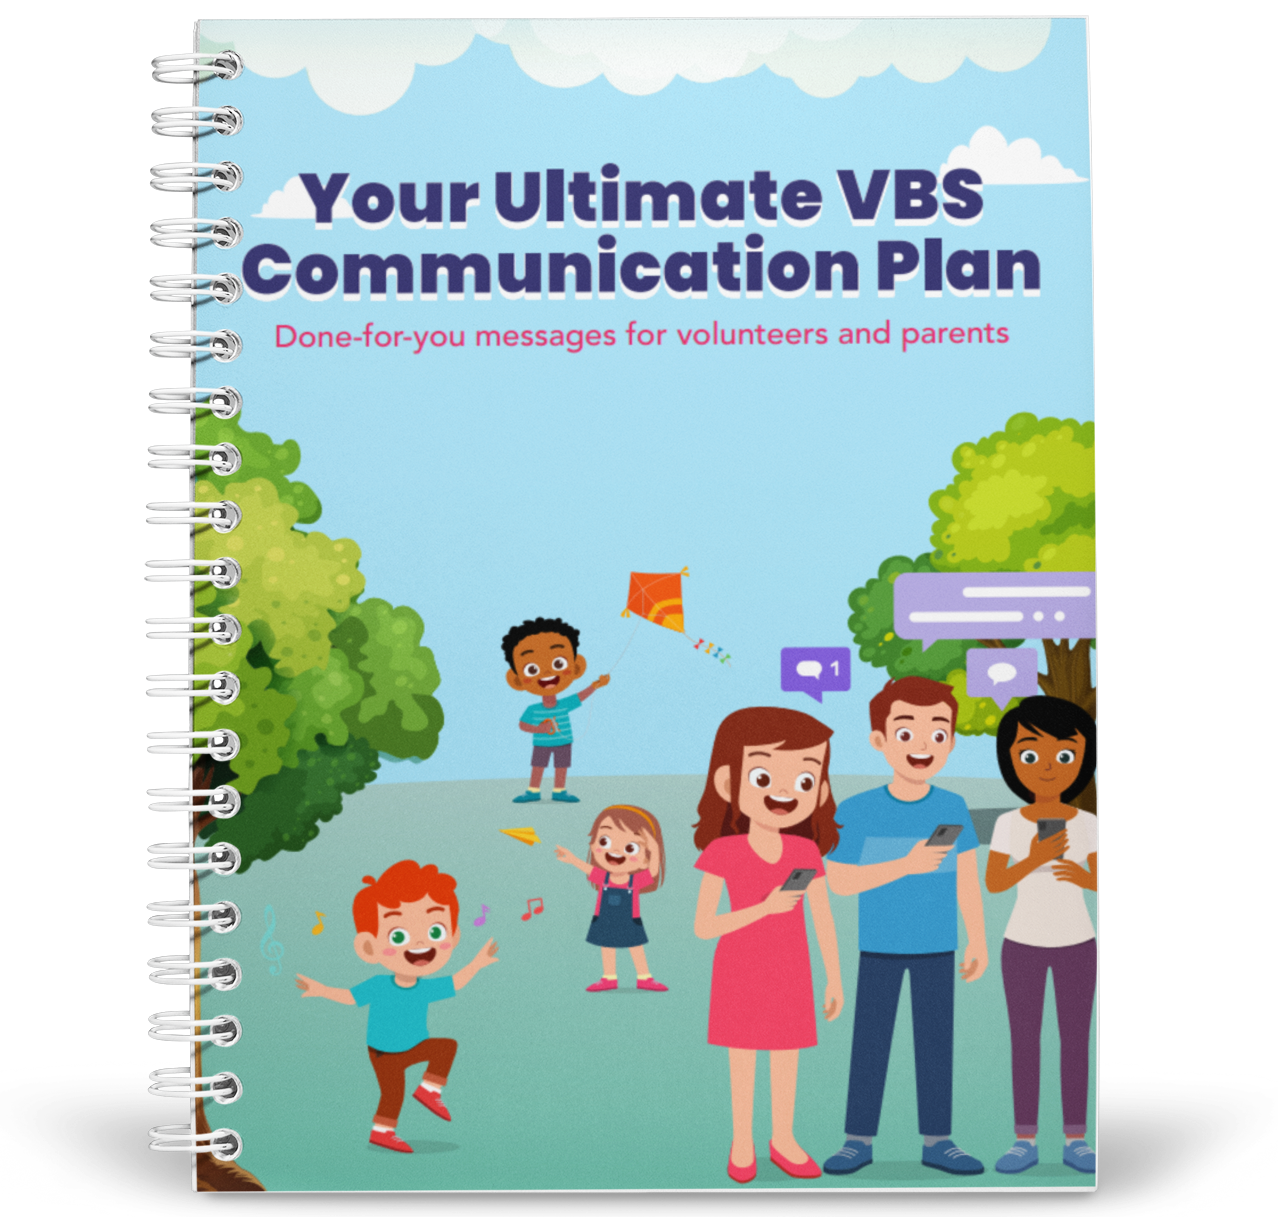 Your Ultimate VBS Communication Plan